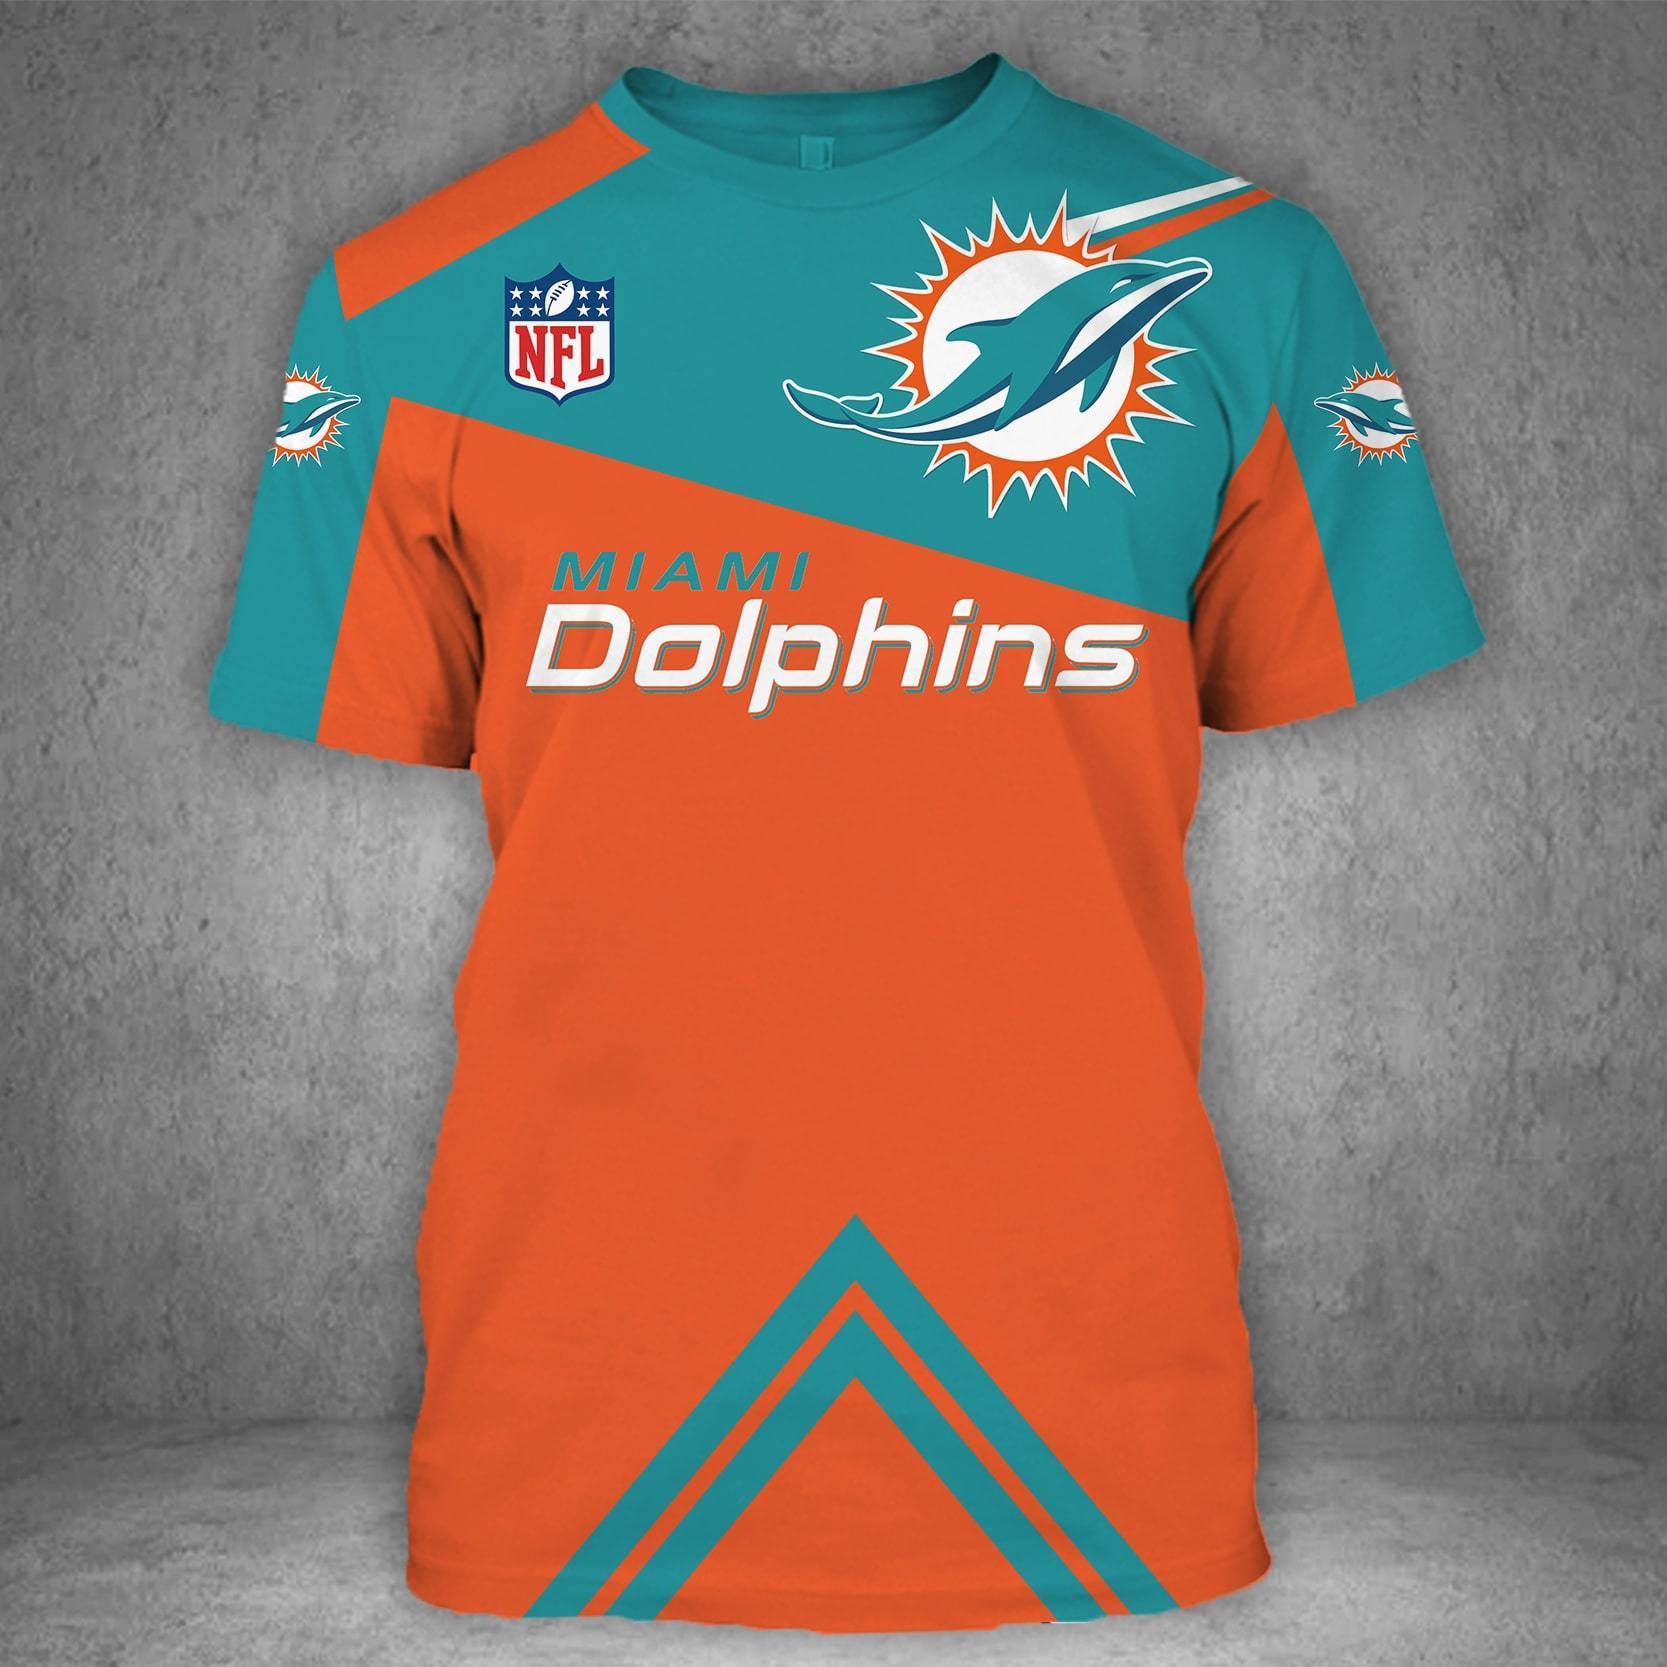 MIAMI DOLPHINS LOVE HOODIE 3D VIP 83